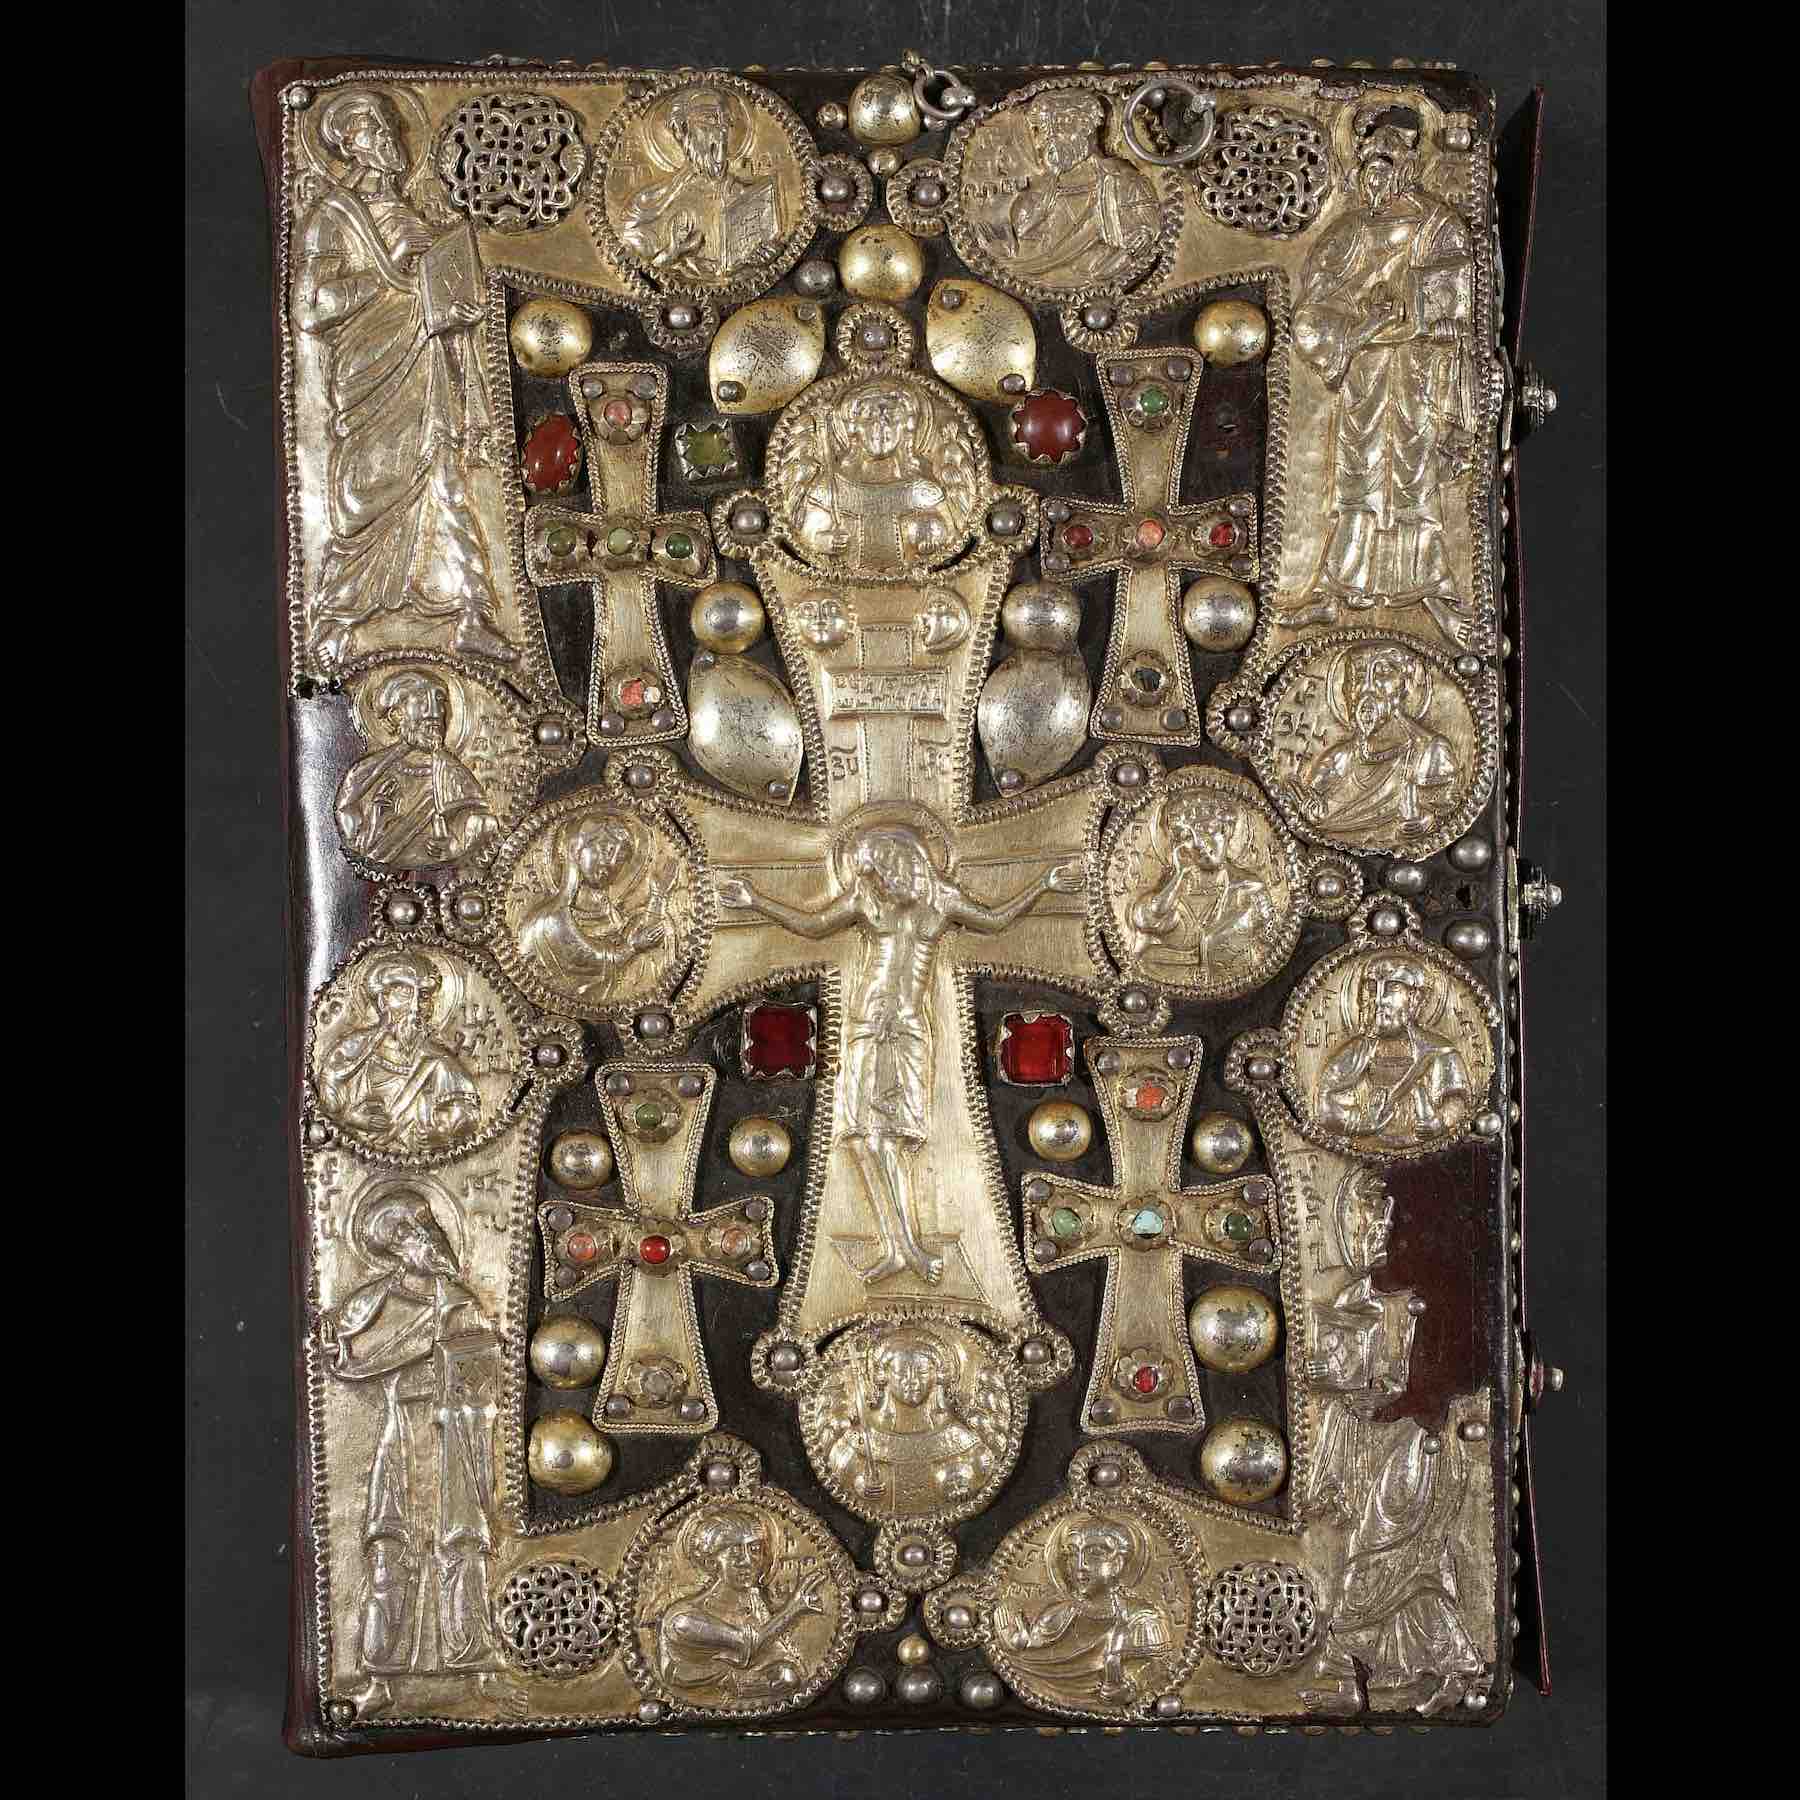 HMML’s Eastern Christian collections include a large number of Armenian manuscripts containing important texts and bookbindings, like this silver and jeweled cover of an Armenian gospel book from Anṭilyās, Lebanon (<a href='https://w3id.org/vhmml/readingRoom/view/510608'>ACC 8</a>)